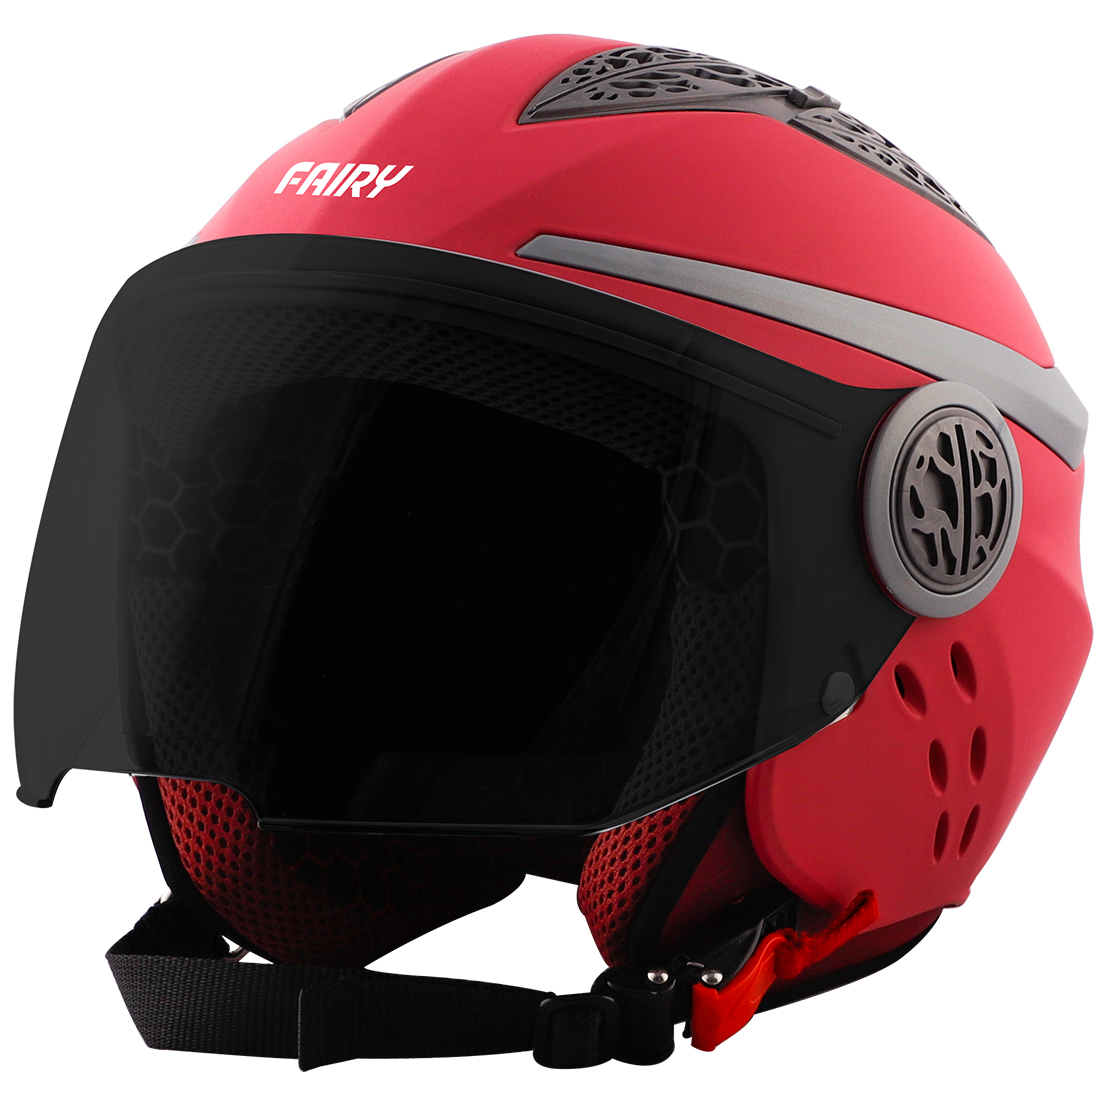 Steelbird Fairy Specially Designed ISI Certified Helmet For Girls || Womens  (Glossy Cherry Red With Smoke Visor)